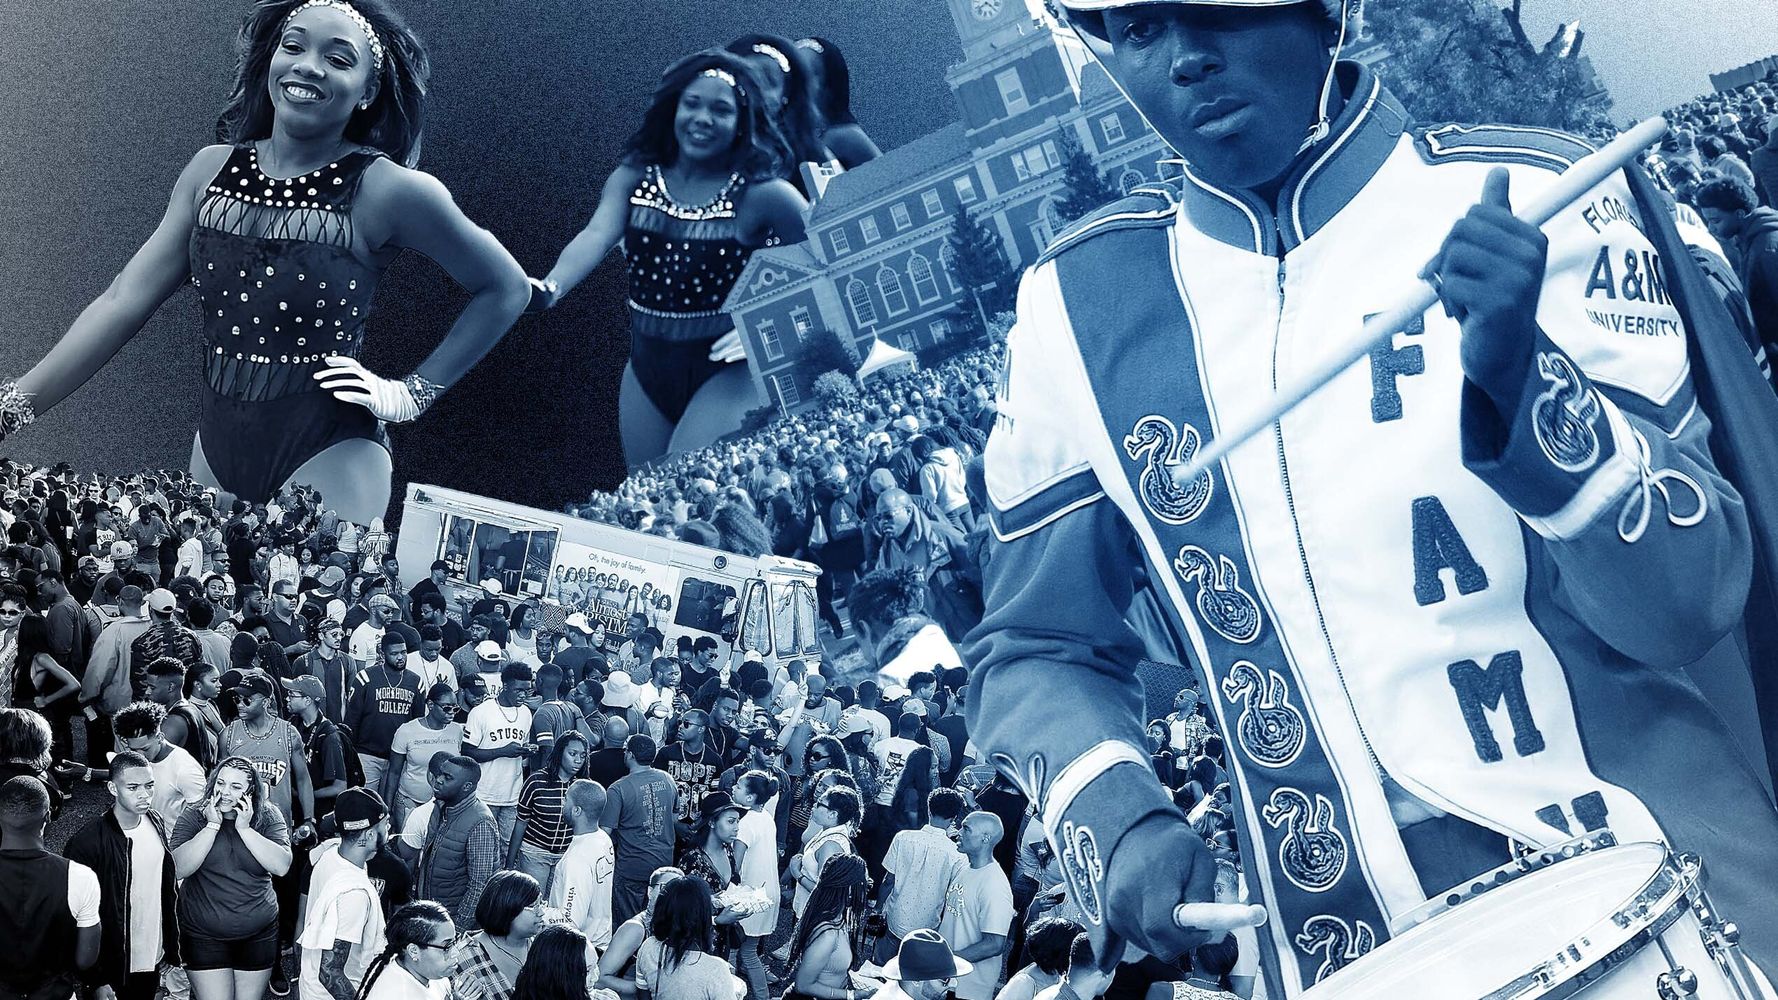 COVID-19 Canceled HBCU Homecomings. These Folks Are Keeping Their Spirit Alive.